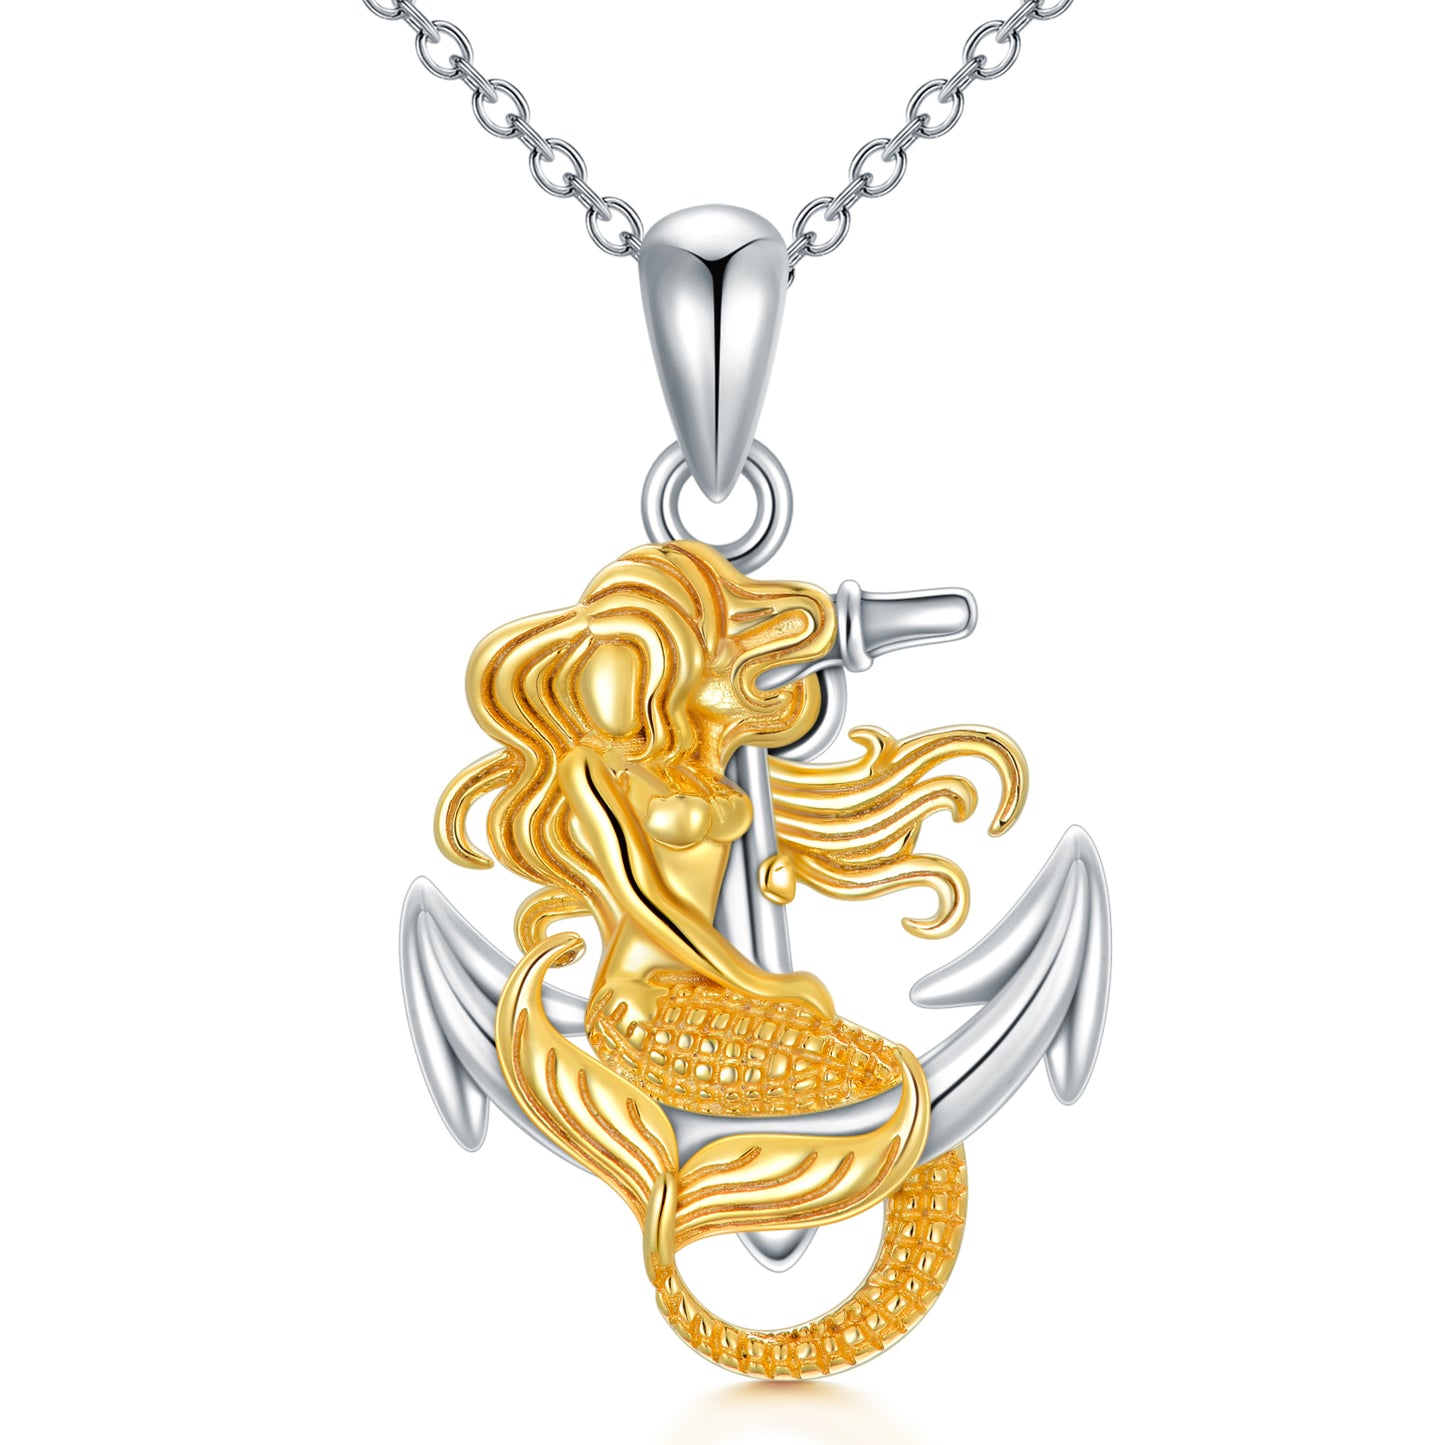 A Anchor Mermaid Necklace for Women 925 Sterling Silver Mermaid Pendant Necklace Ocean Nautical Jewelry with an anchor on it, by Maramalive™.